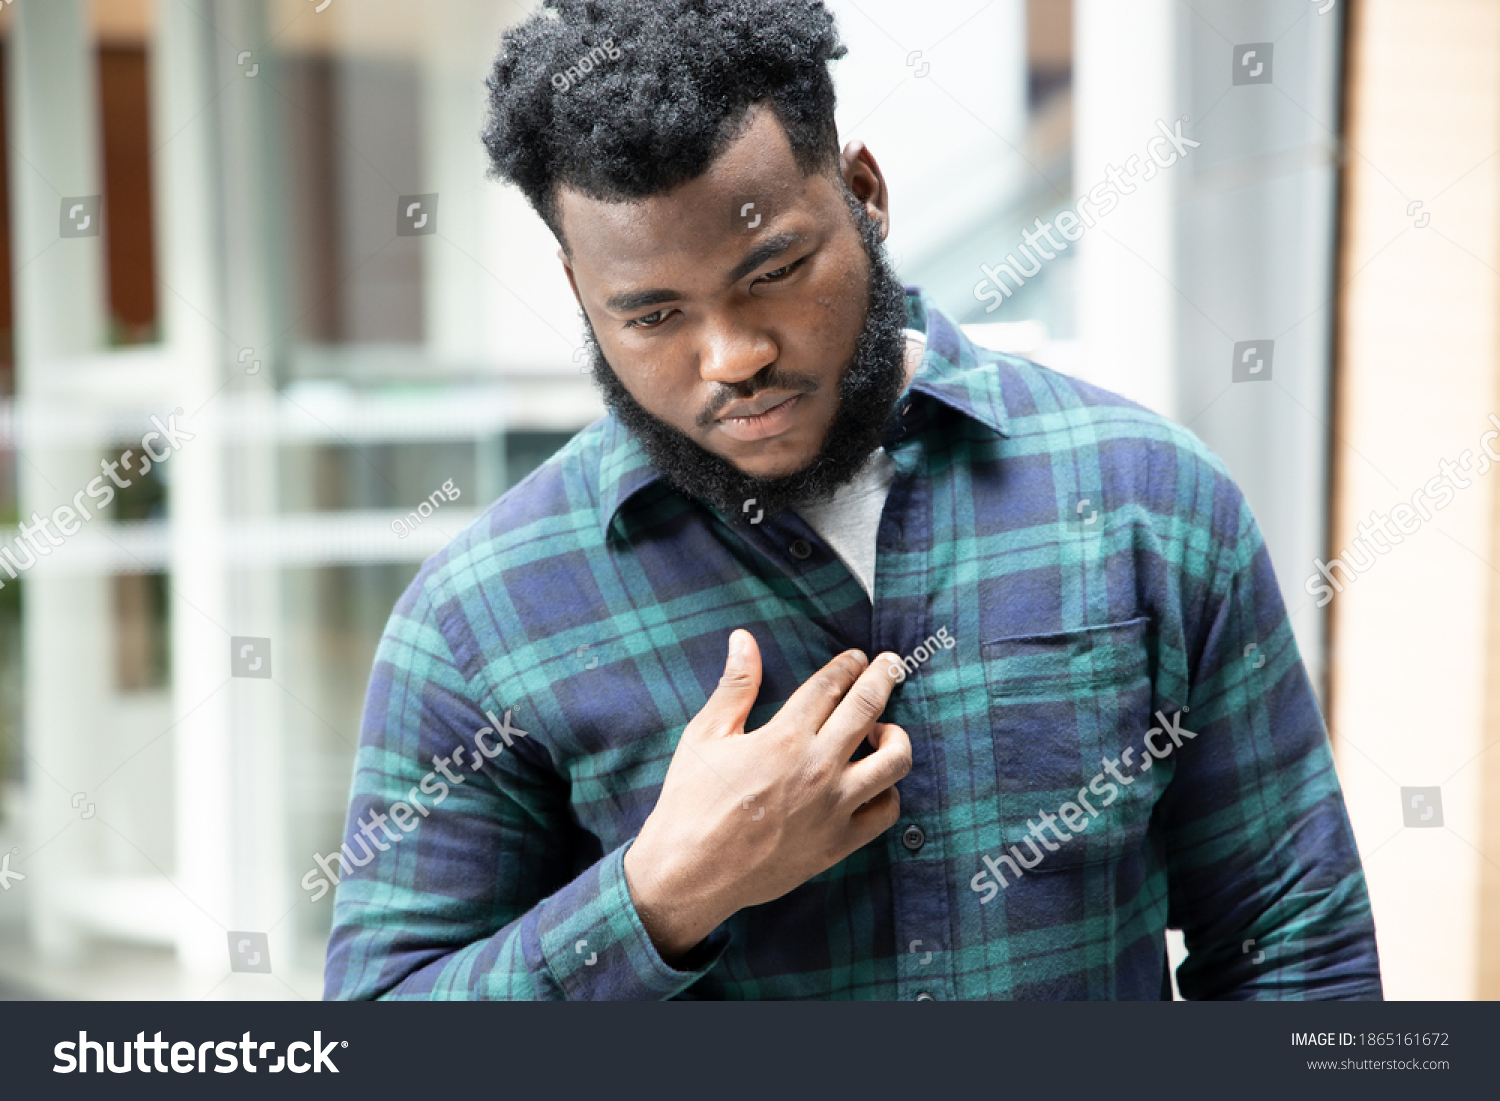 African man suffering from acid reflux or GERD; sick stressed black man with indigestion, acid reflux or gerd symptoms; man health care, body care, sickness, pain concept; adult african man model #1865161672